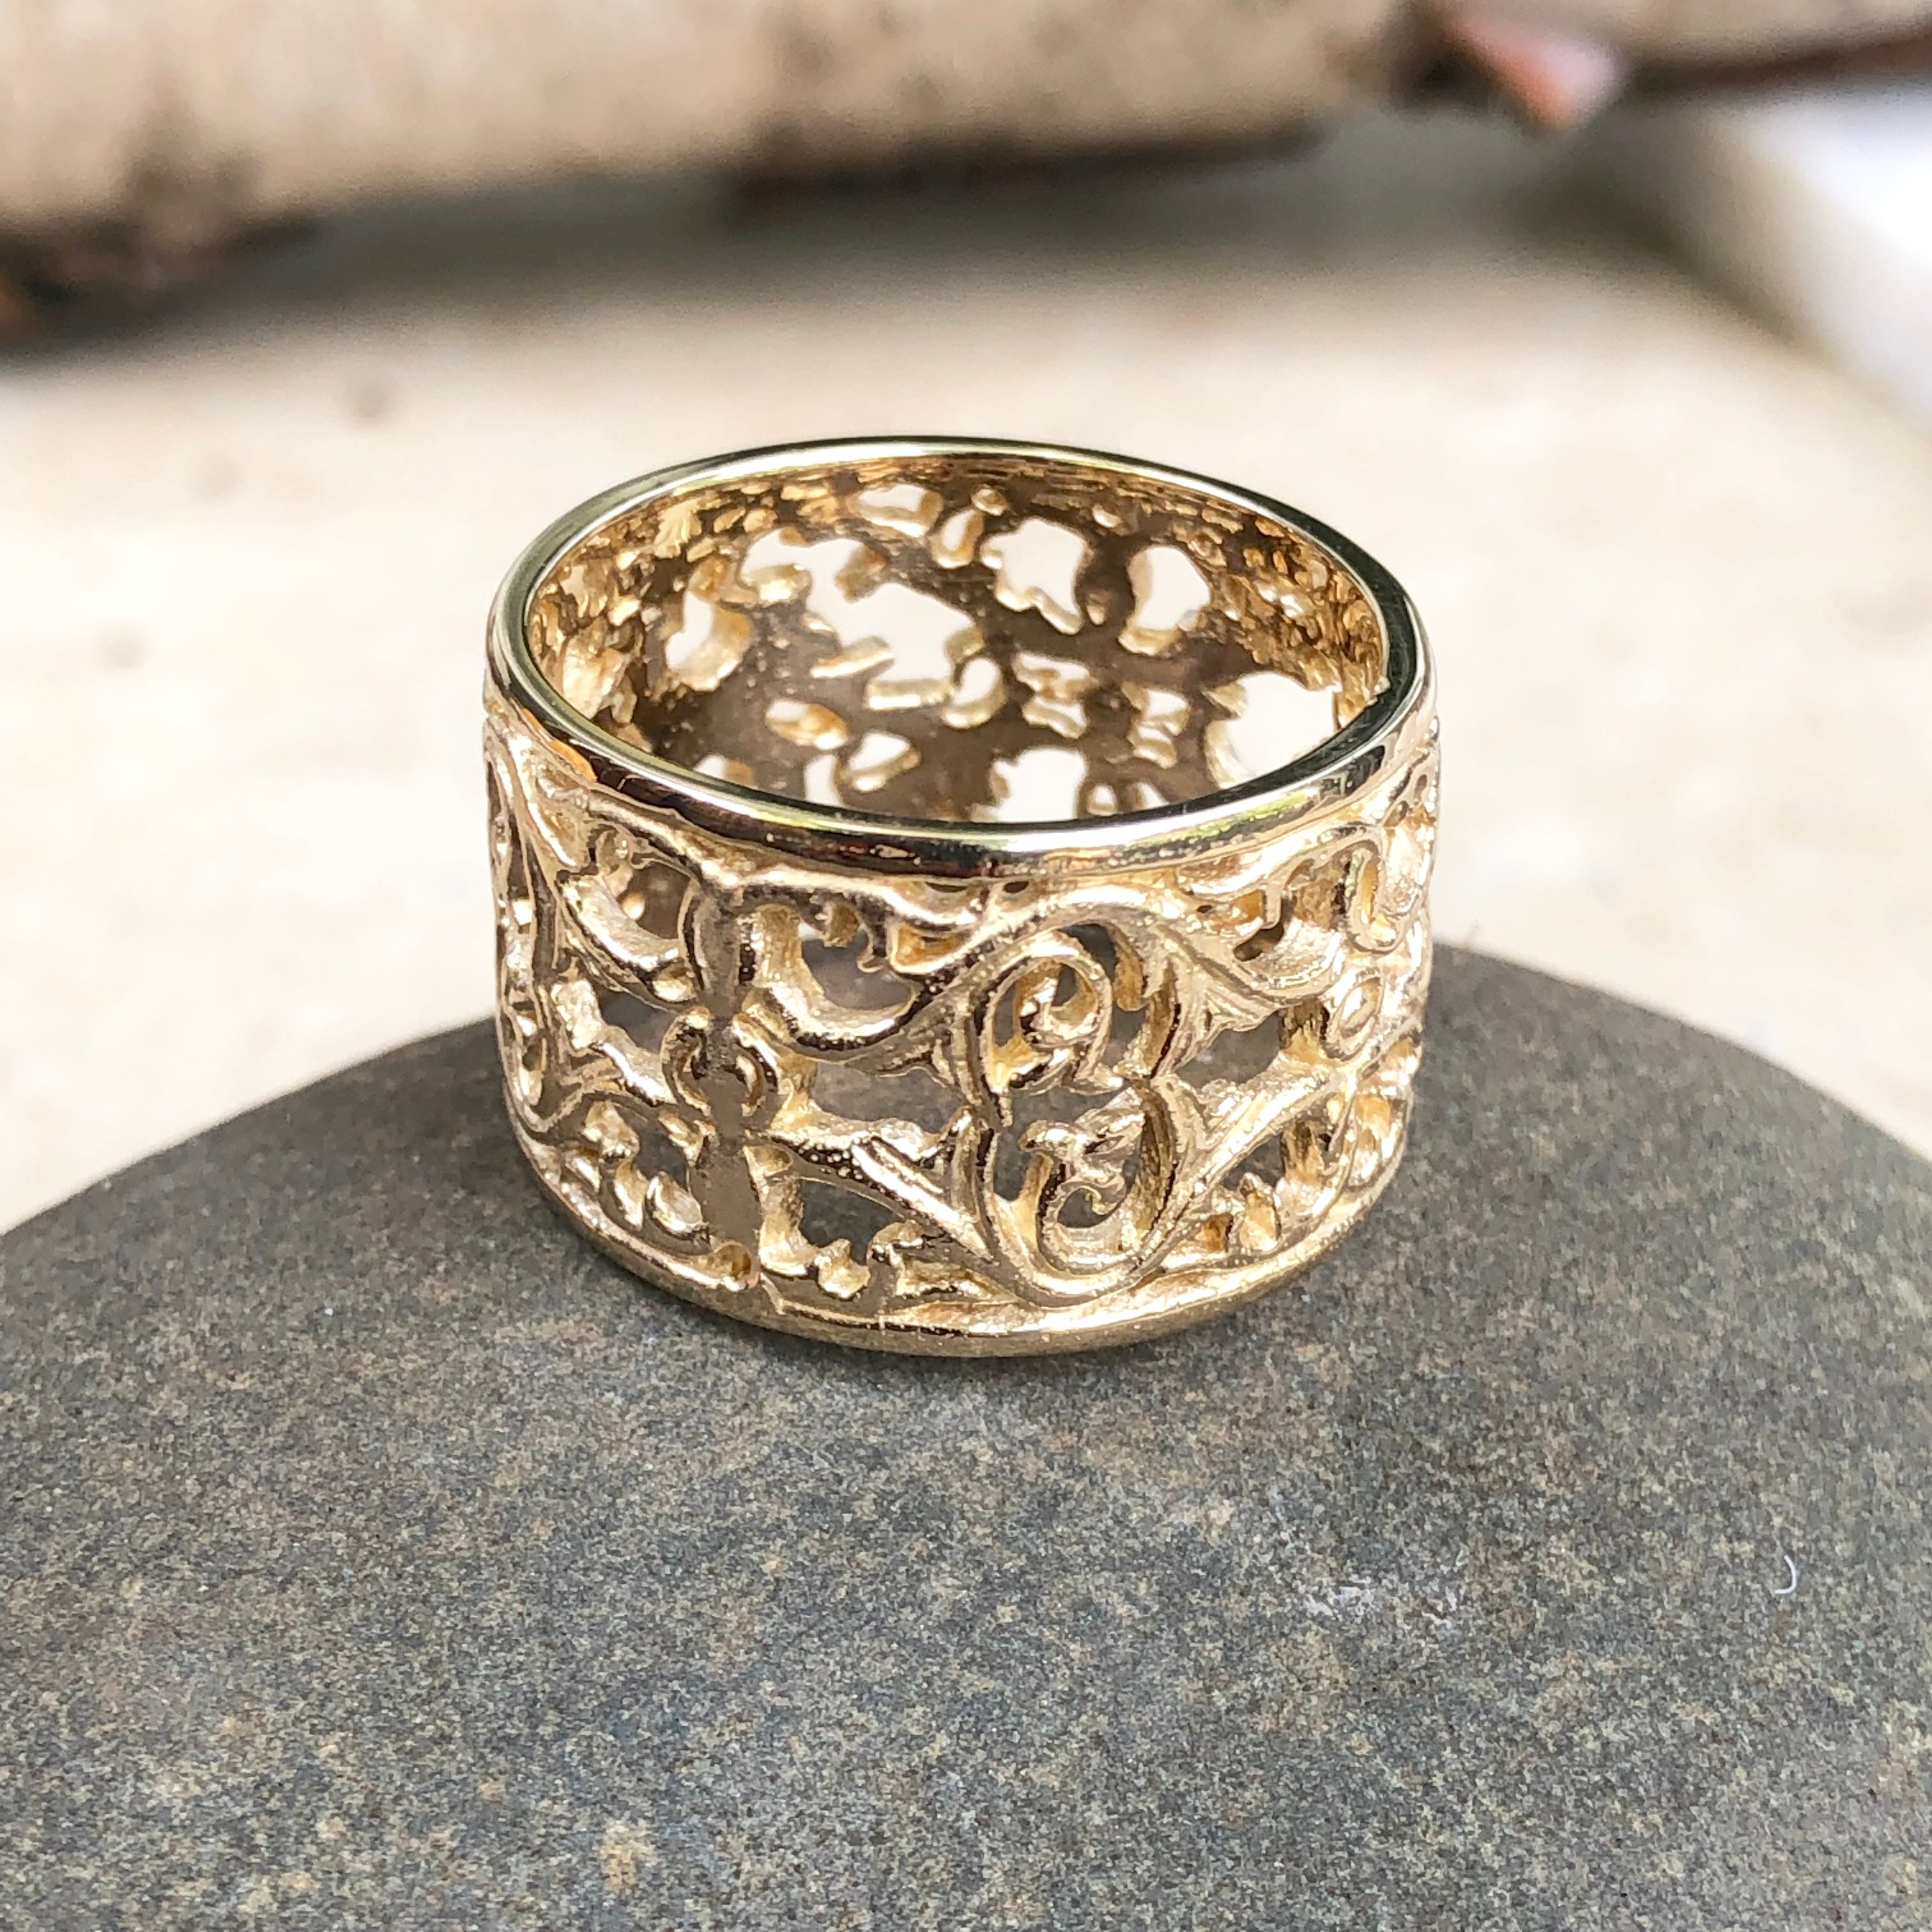 Braided Floral Ring. Custom Jewelry Design - ZBrushCentral